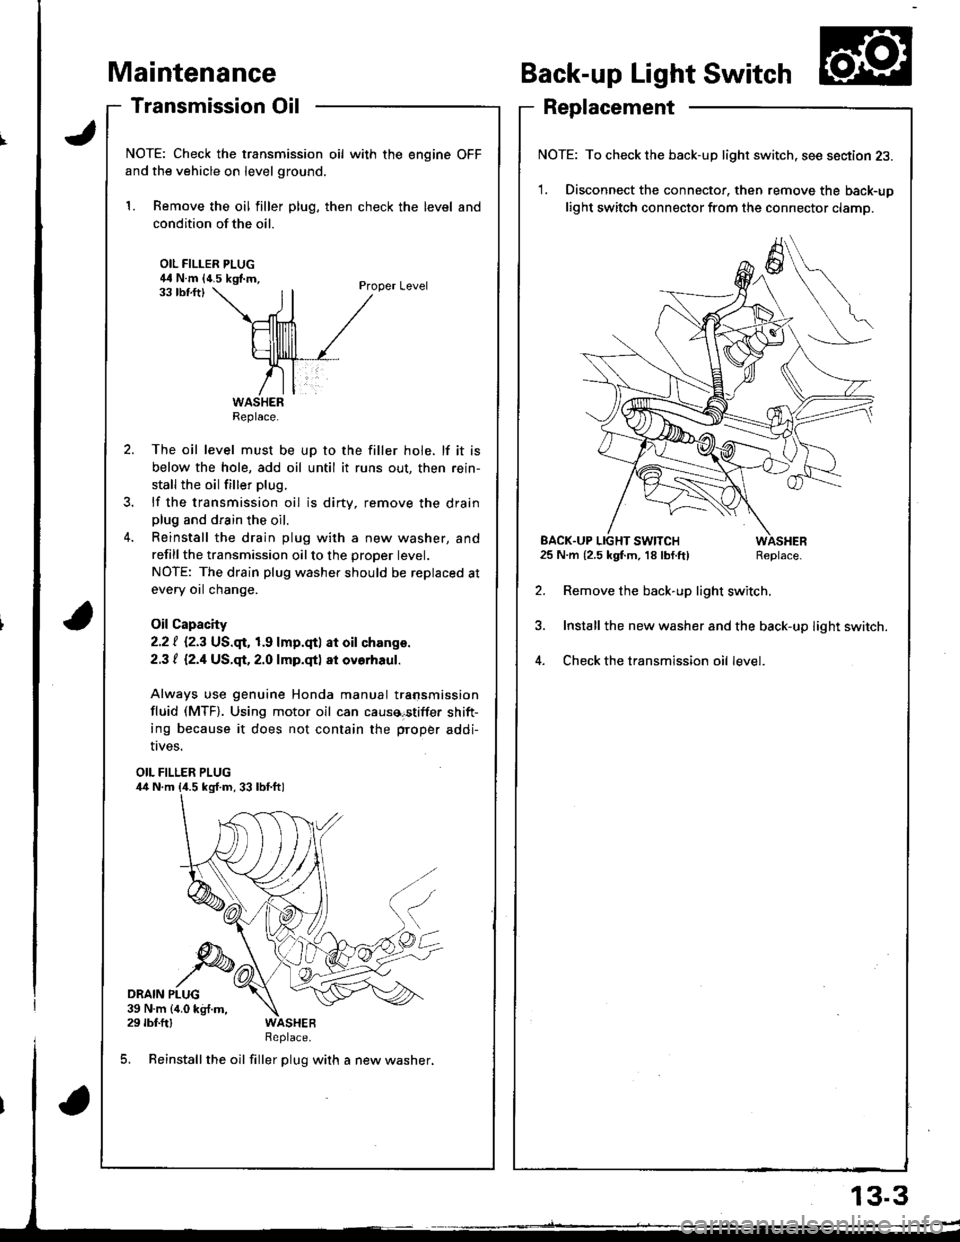 HONDA INTEGRA 1998 4.G Service Manual aintenance
Transmission Oil
NOTE: Check the transmission oil with the engine OFF
and the vehicle on level ground.
1. Remove the oil filler plug, then check the level and
condition of the oil.
OIL FILL